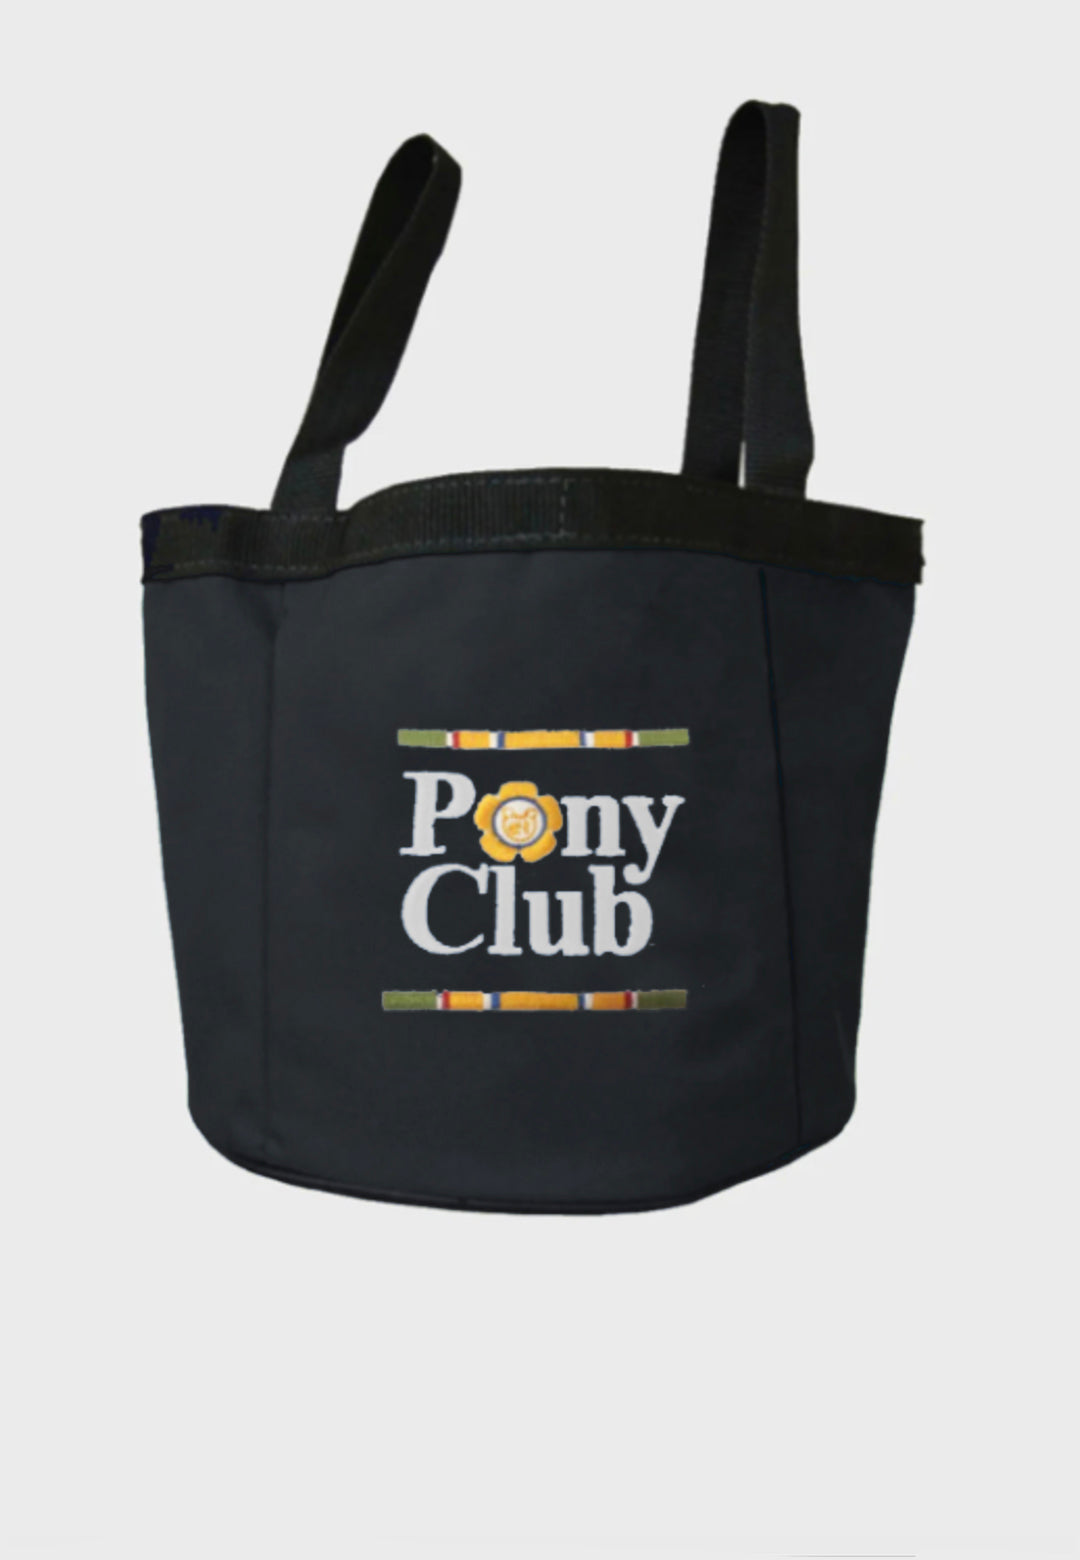 Aiken County Pony Club World Class Equine Rally Tote, 2 Color Options